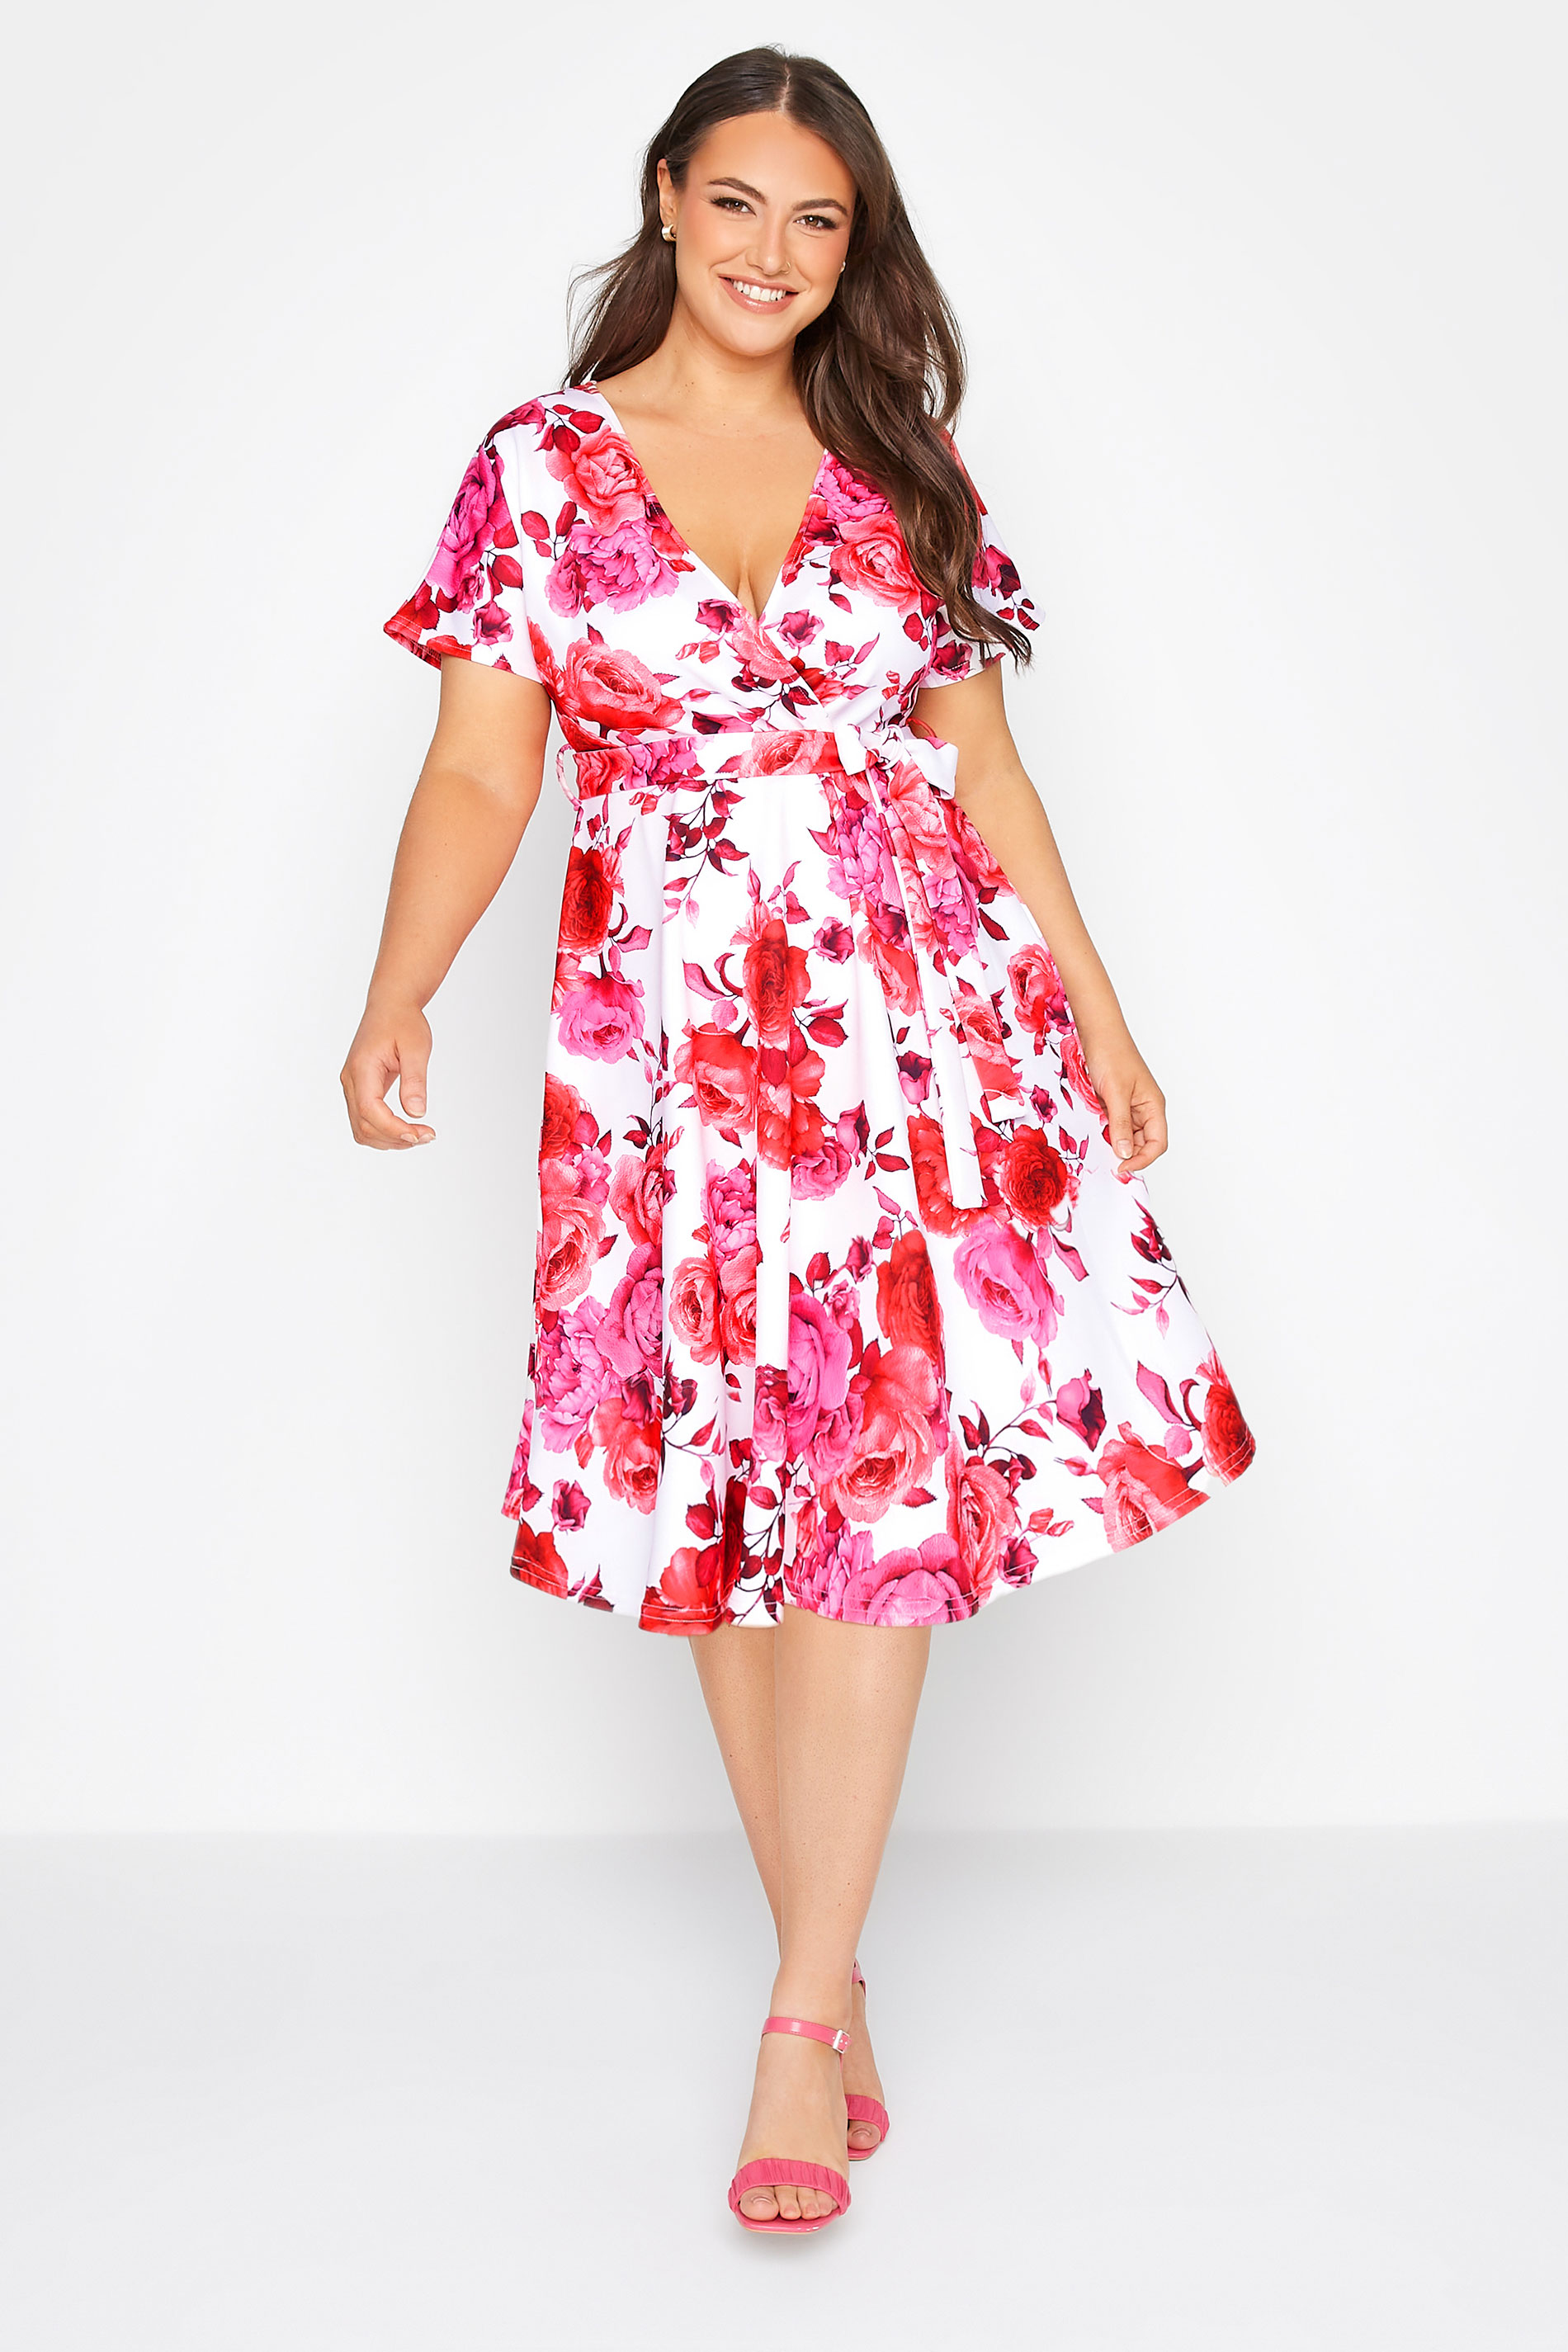 Robes Grande Taille Grande taille  Robes Patineuses | YOURS LONDON - Robe Blanche Floral Rose en Cache-Coeur - IN64204